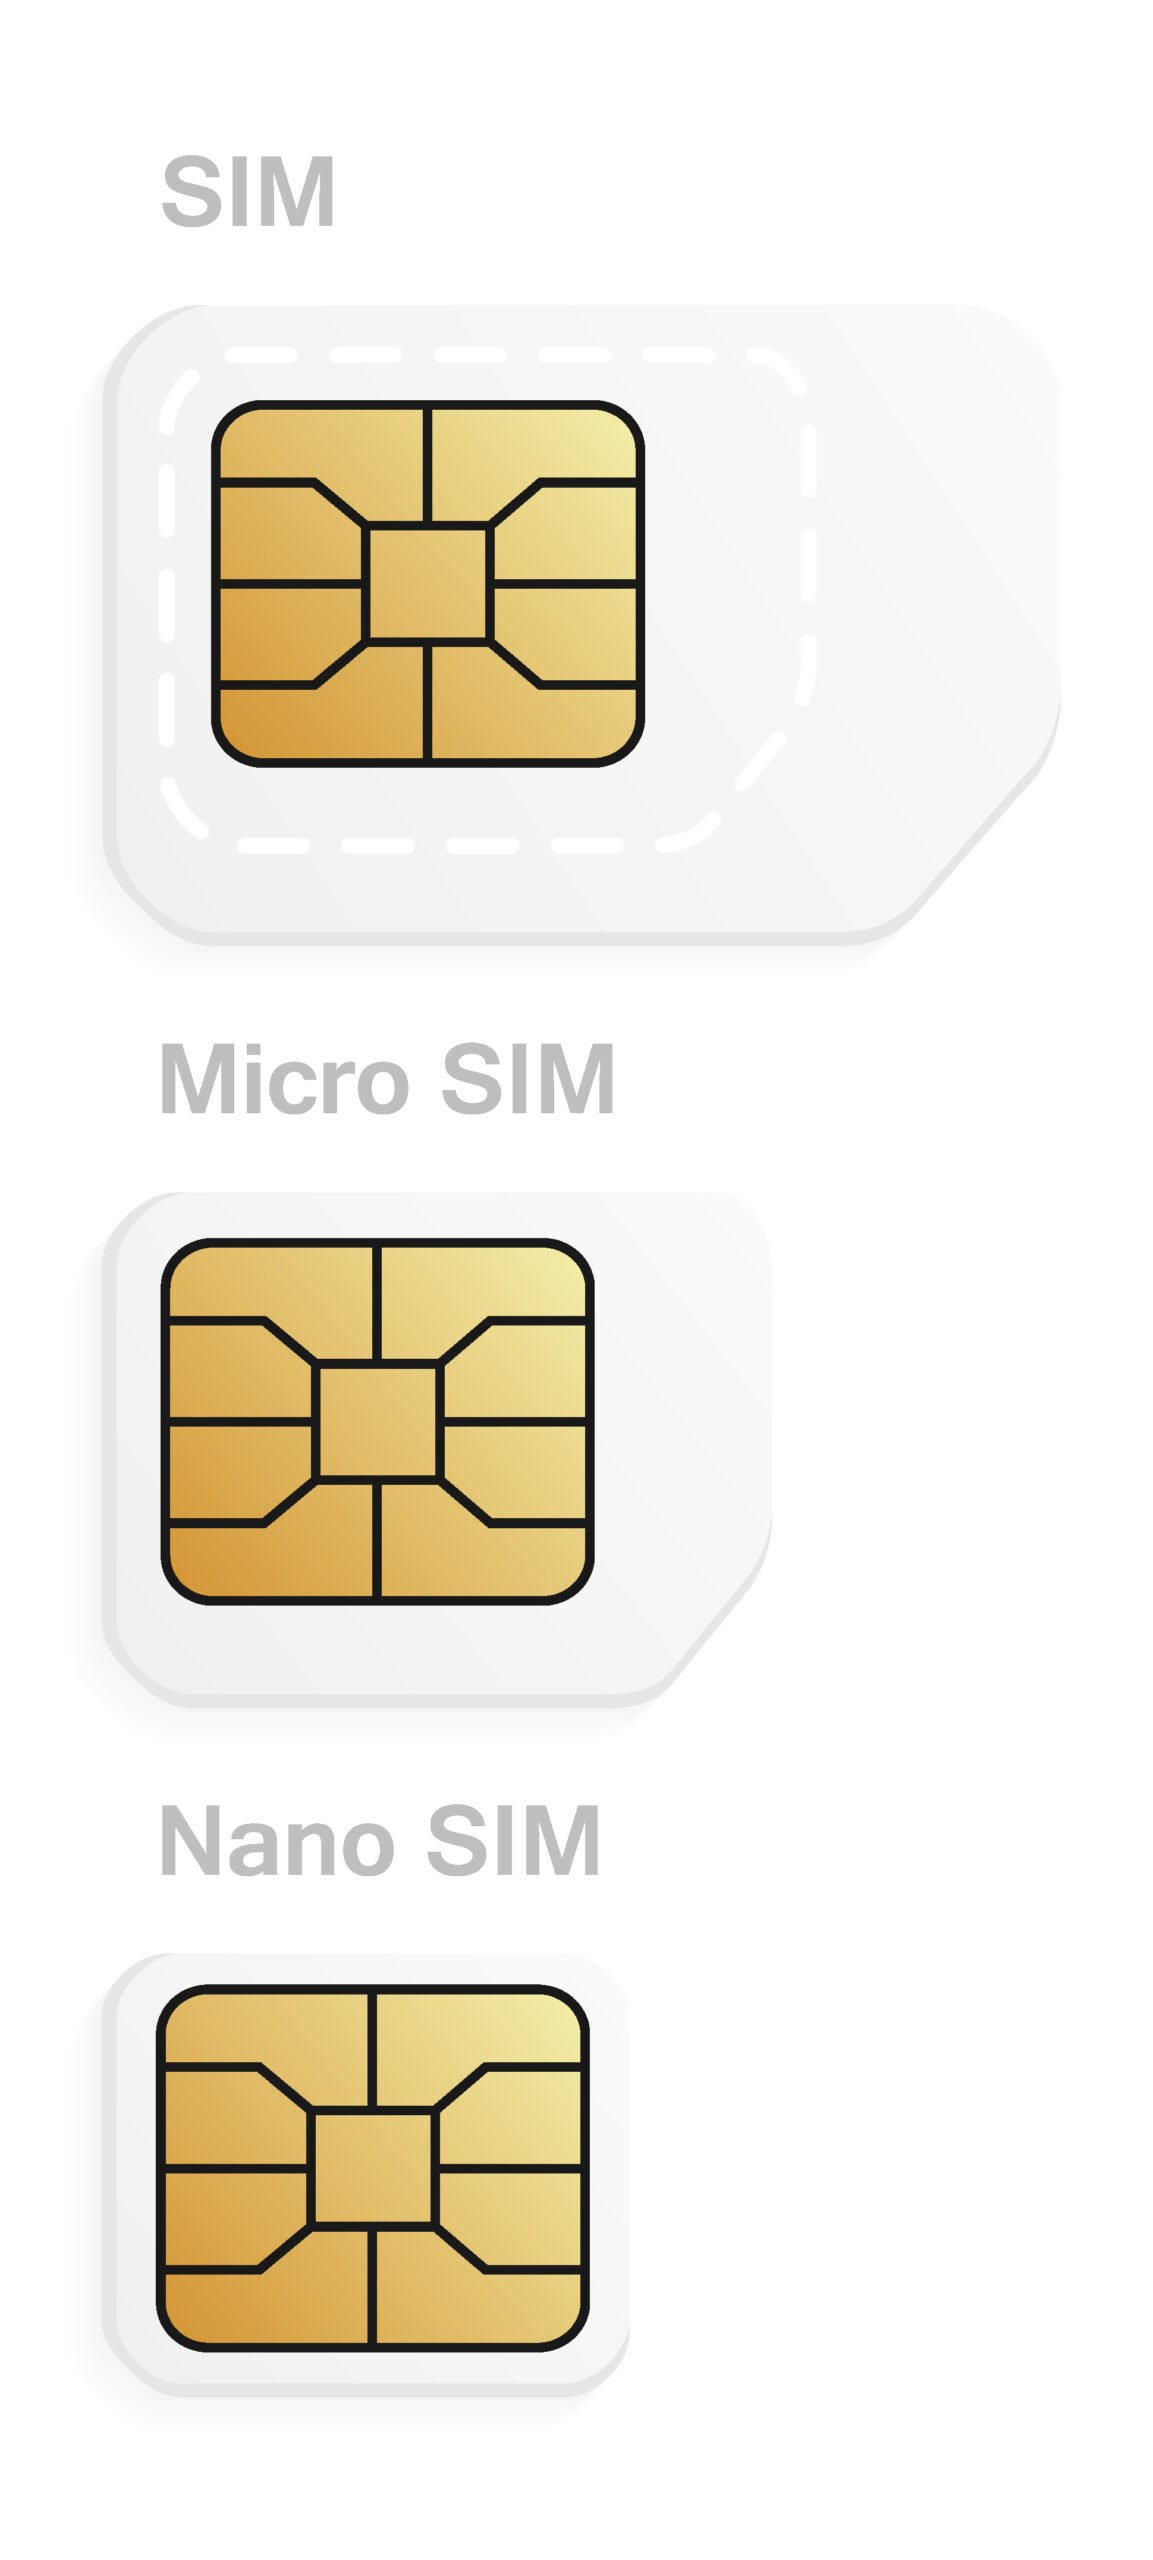 How to Remove the SIM Card From an Samsung Galaxy (5 Easy Steps)